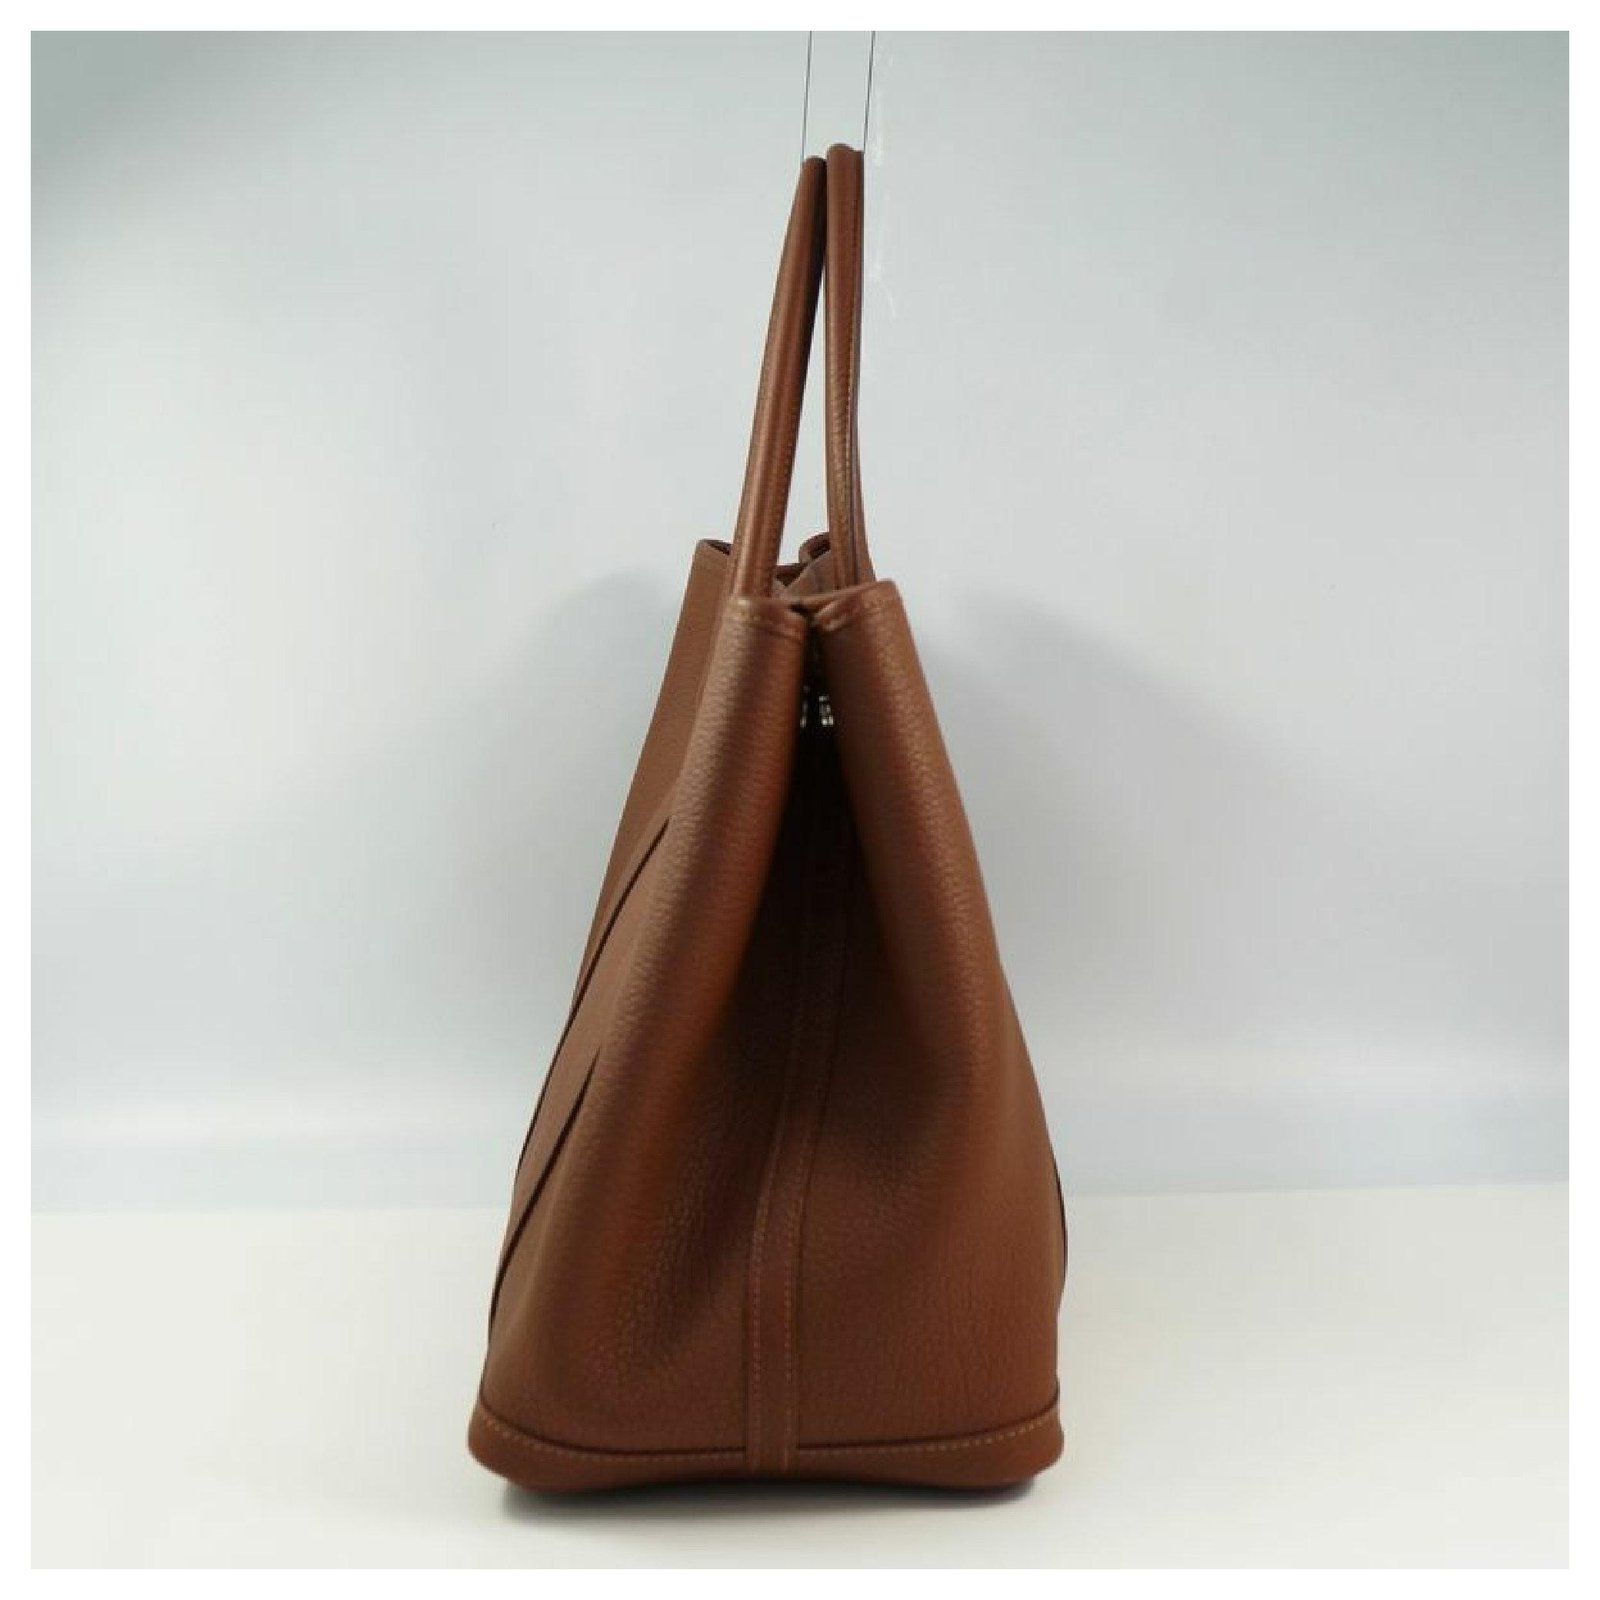 HERMES Garden Party PM Hand Bag Leather ia Brown 0306T